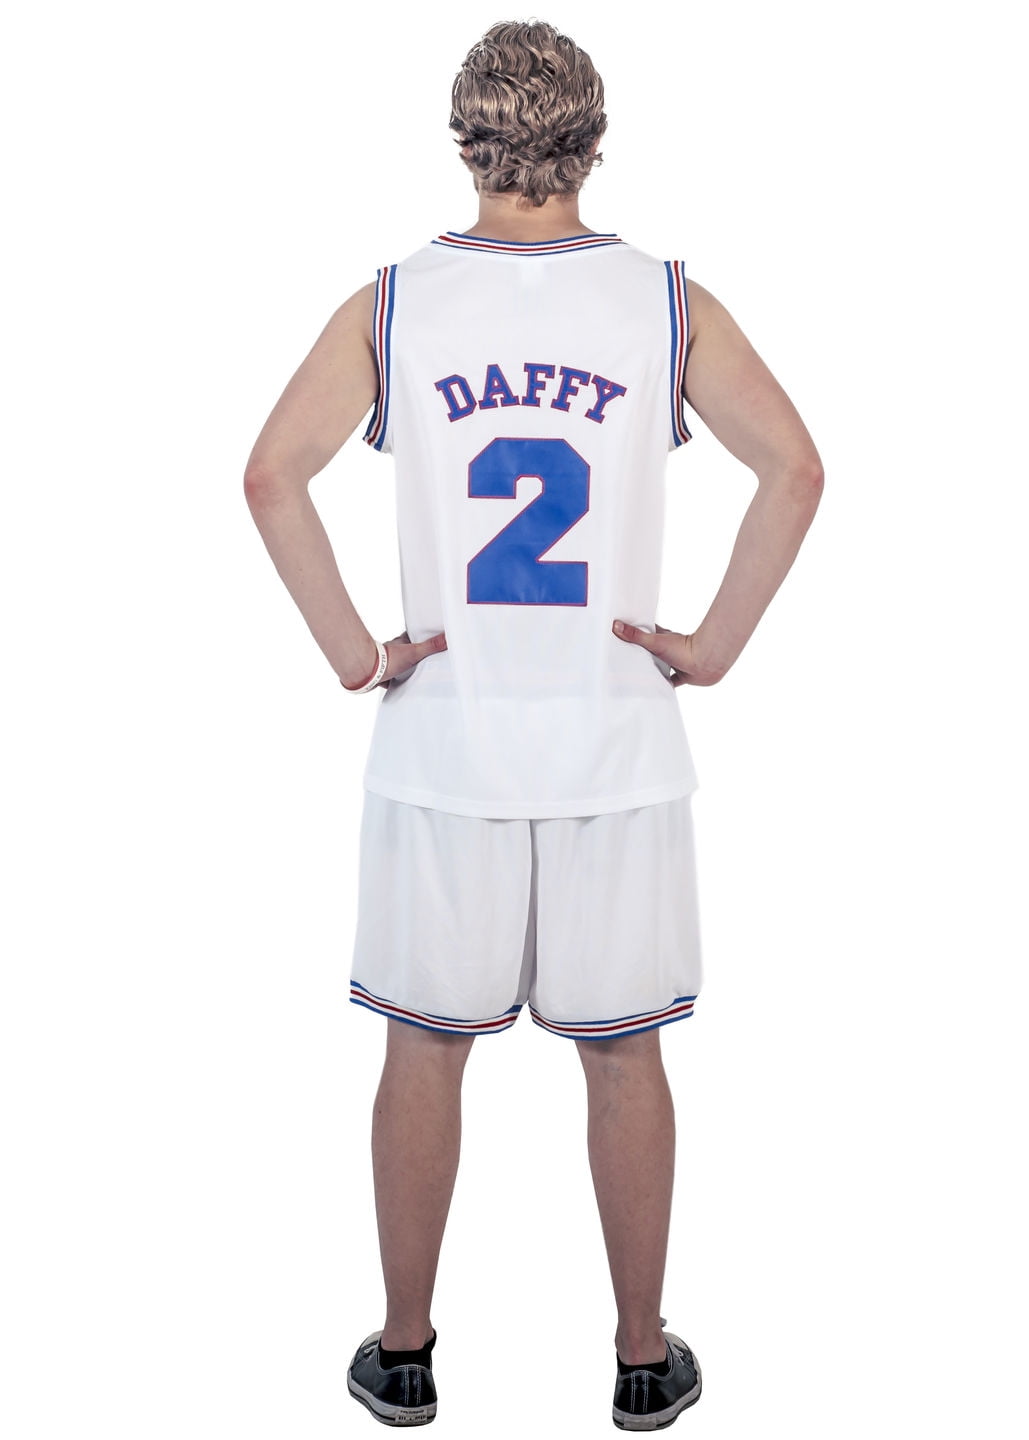 NWT RRP $29.99. Daffy Space Jam Tune Squad Basketball Mesh Singlet Tank Size M 